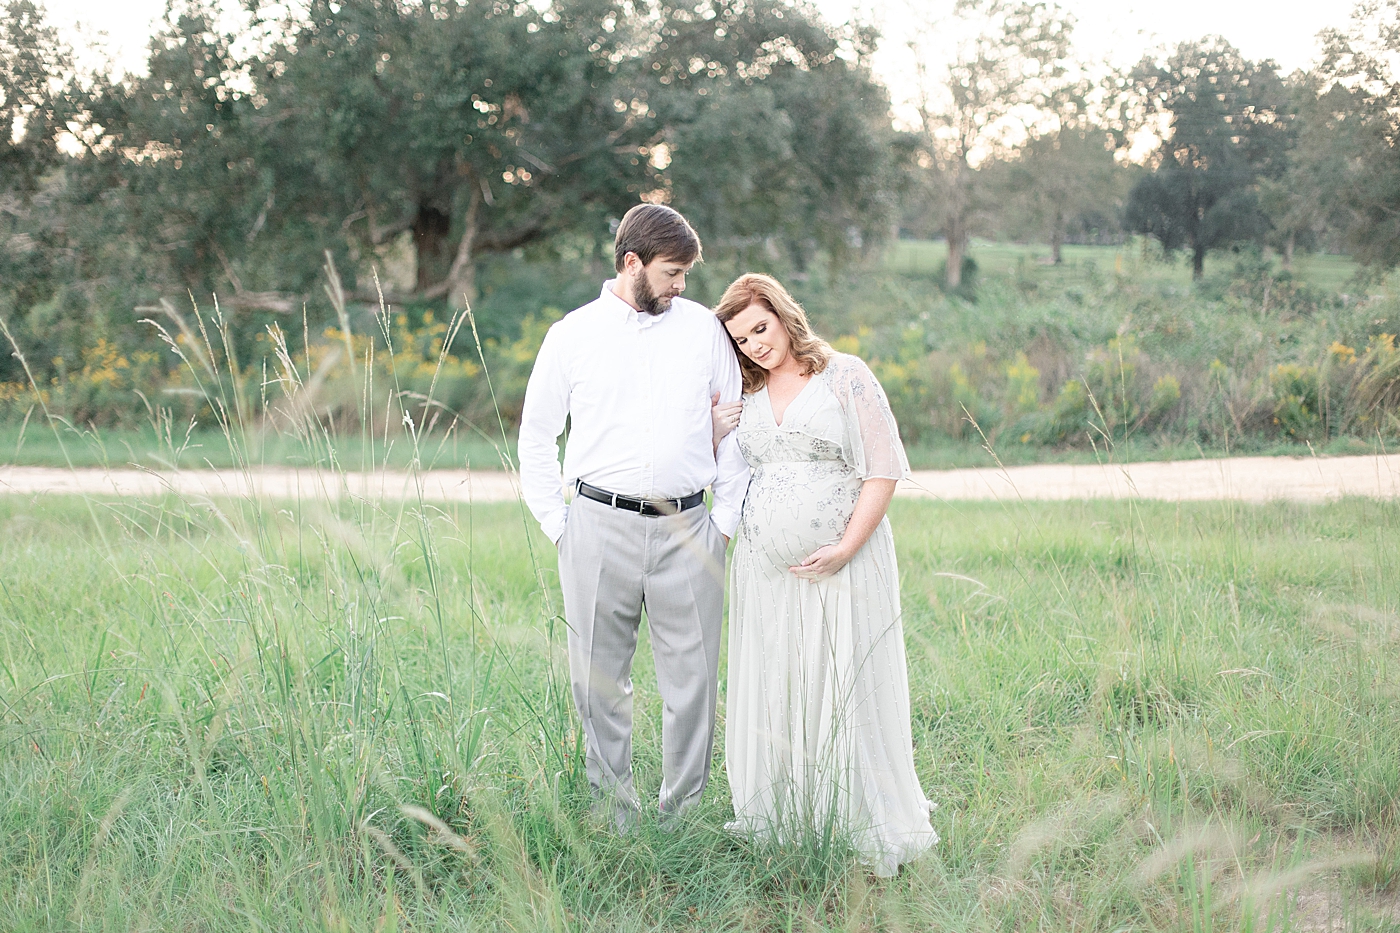 Mother and father to be interacting in a field | Photo by Little Sunshine Photography 